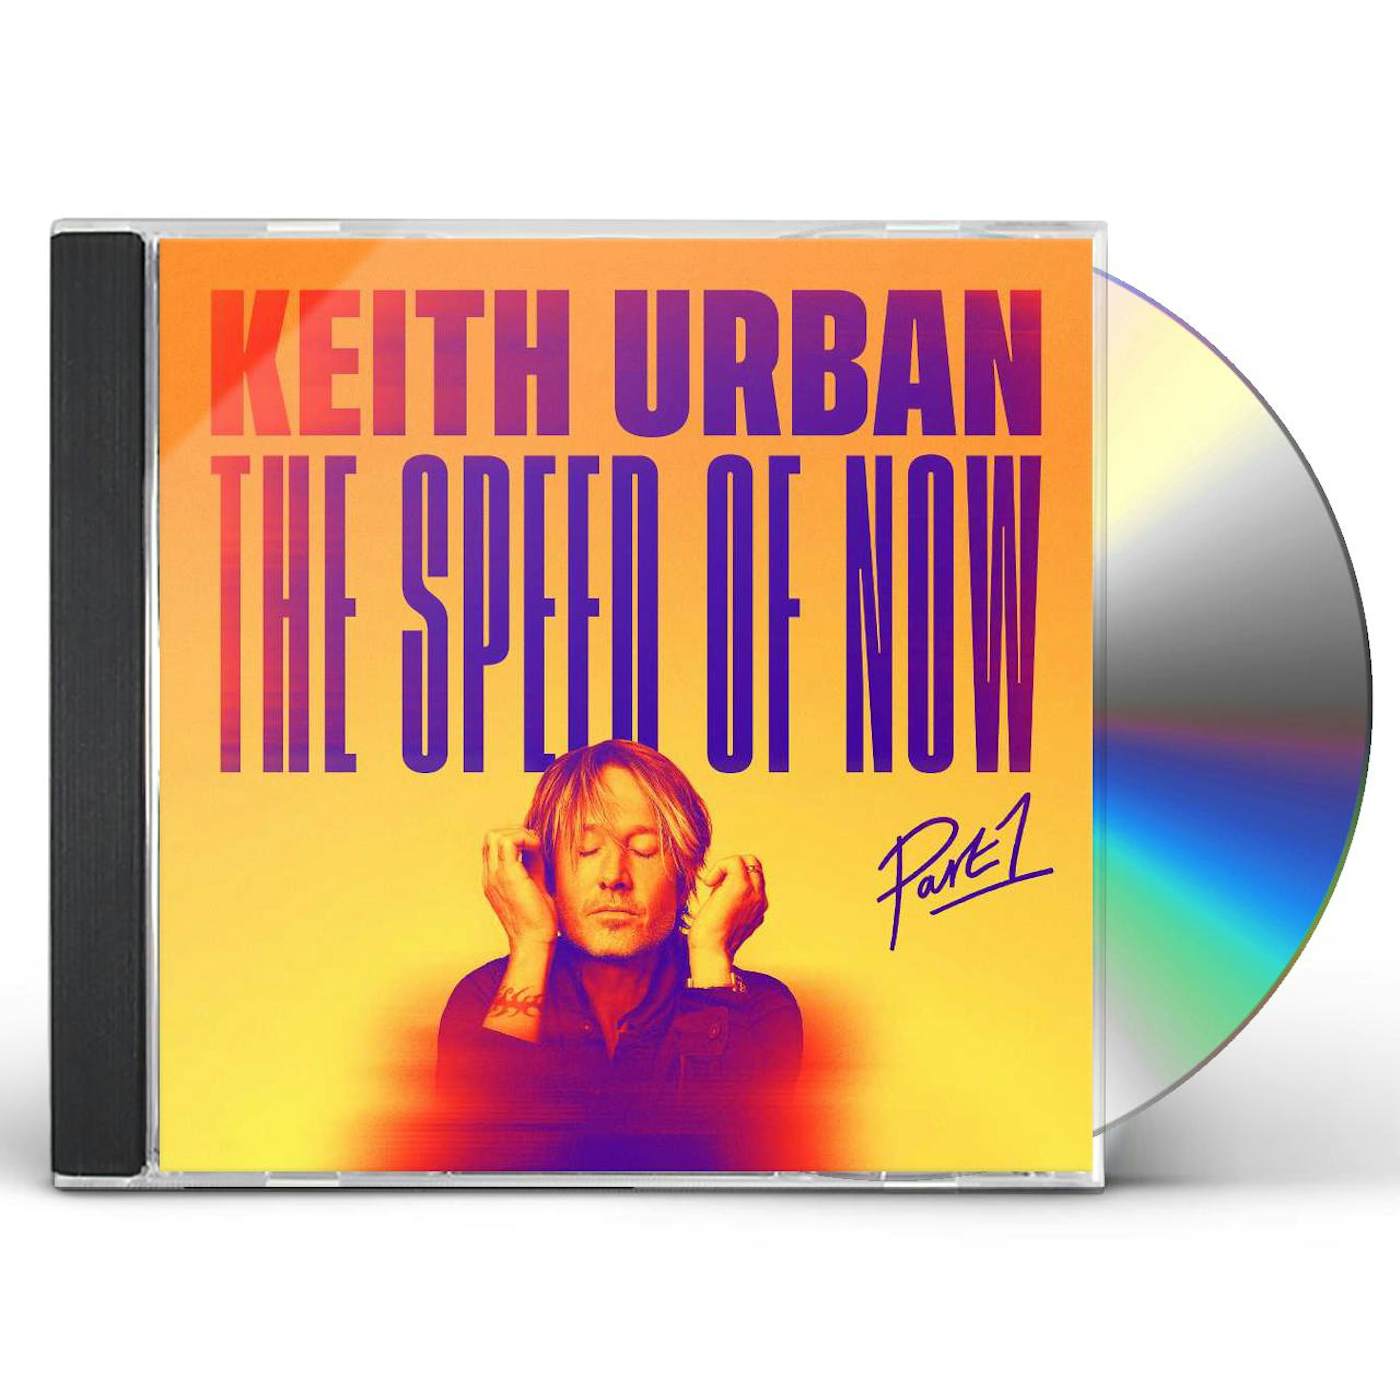 Keith Urban SPEED OF NOW PART 1 CD